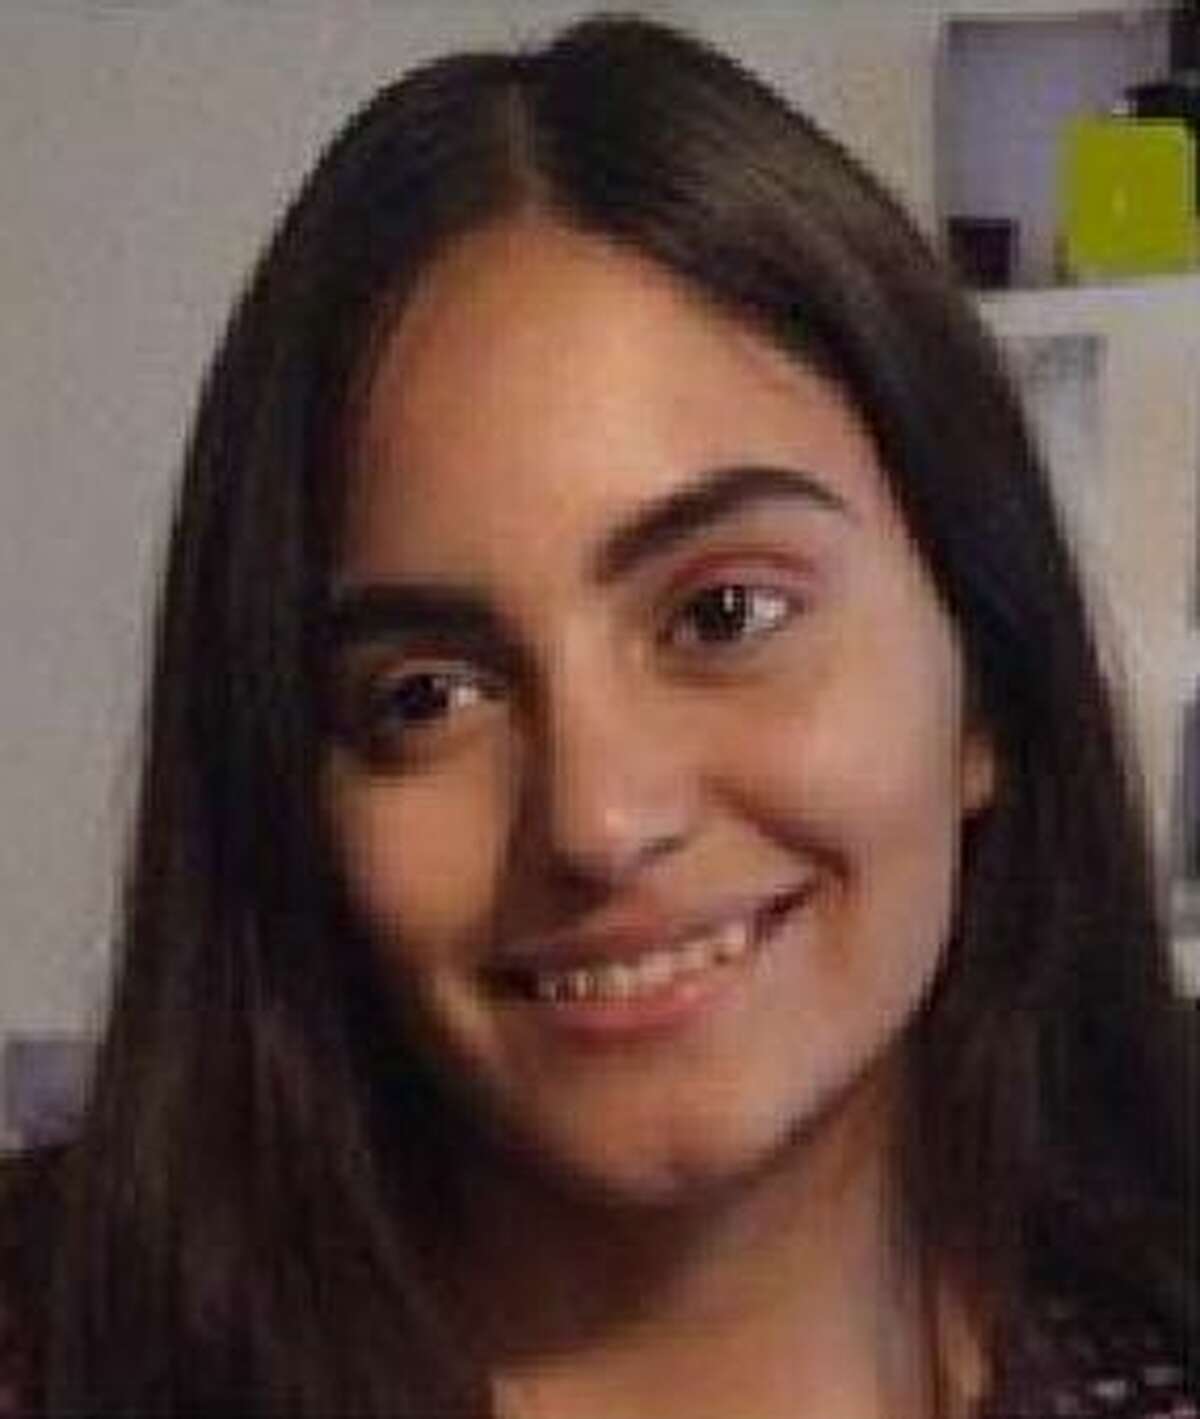 Kiara Soto, 15, was last seen on Jan. 27, according to a statement from The Center for Search and Investigation for Missing Children.